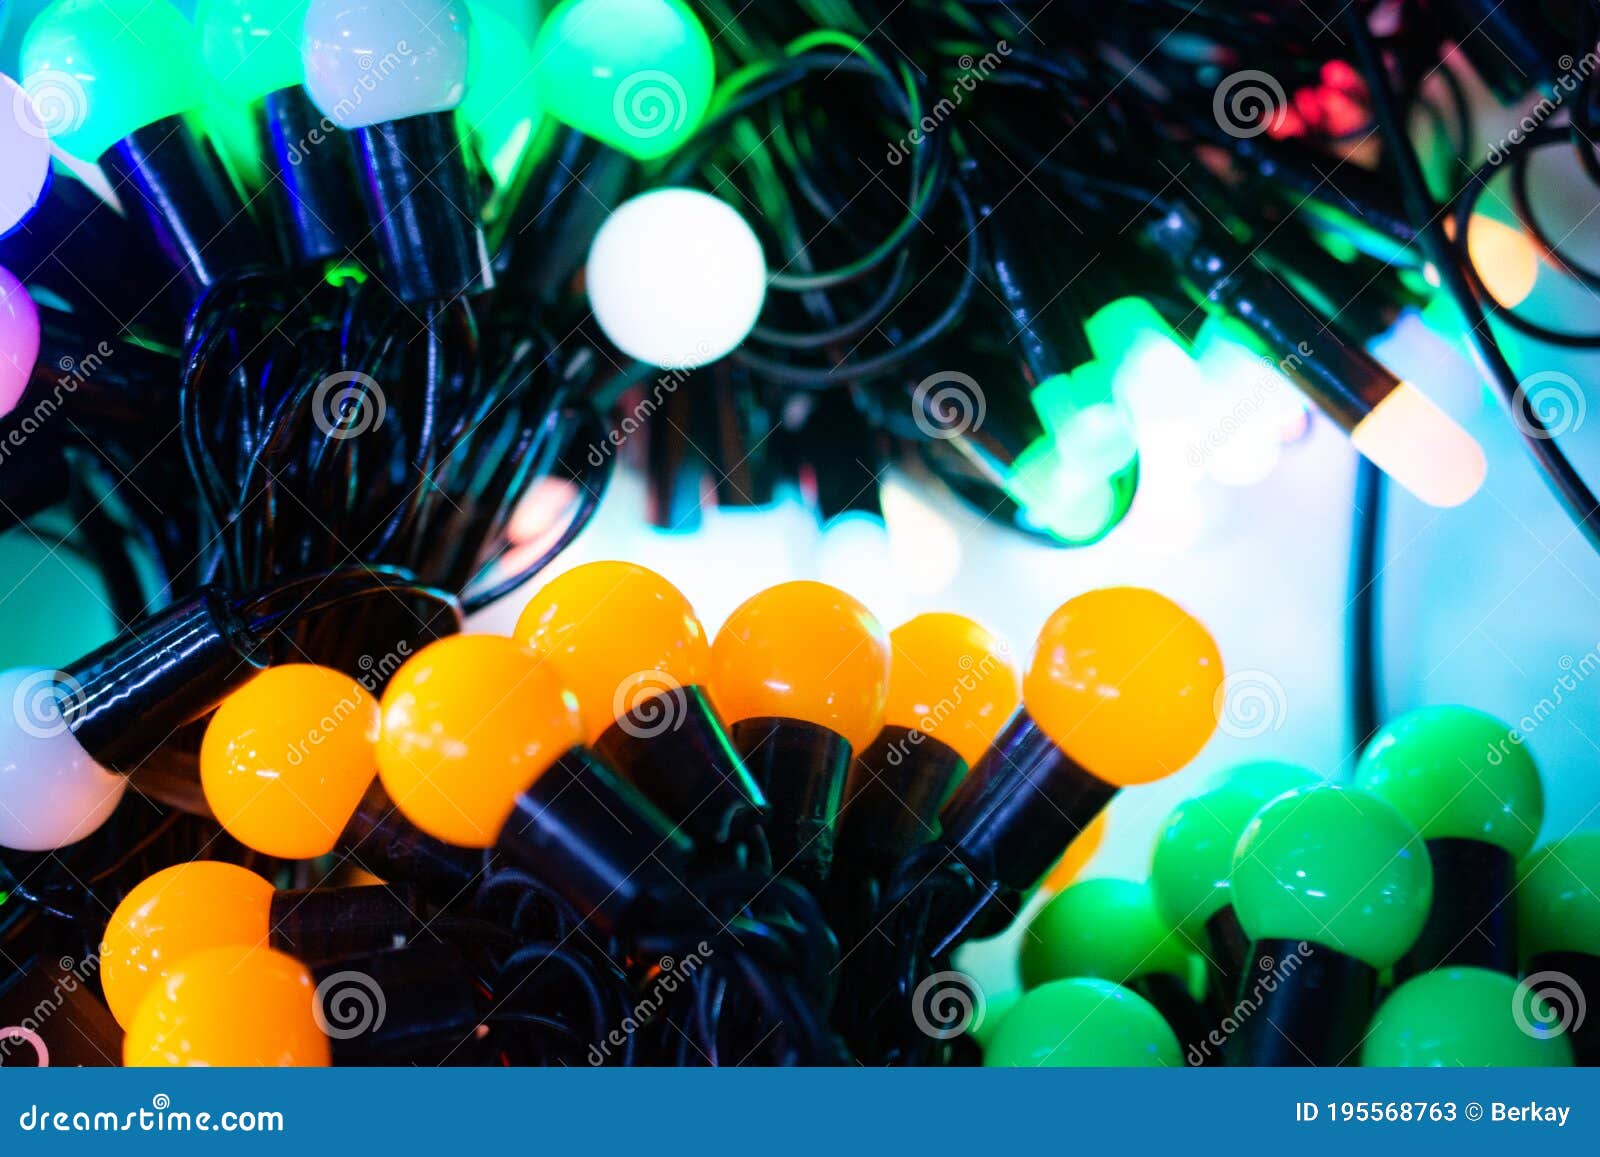 Colorful Christmas Lights and Party Lights Stock Image - Image of ...